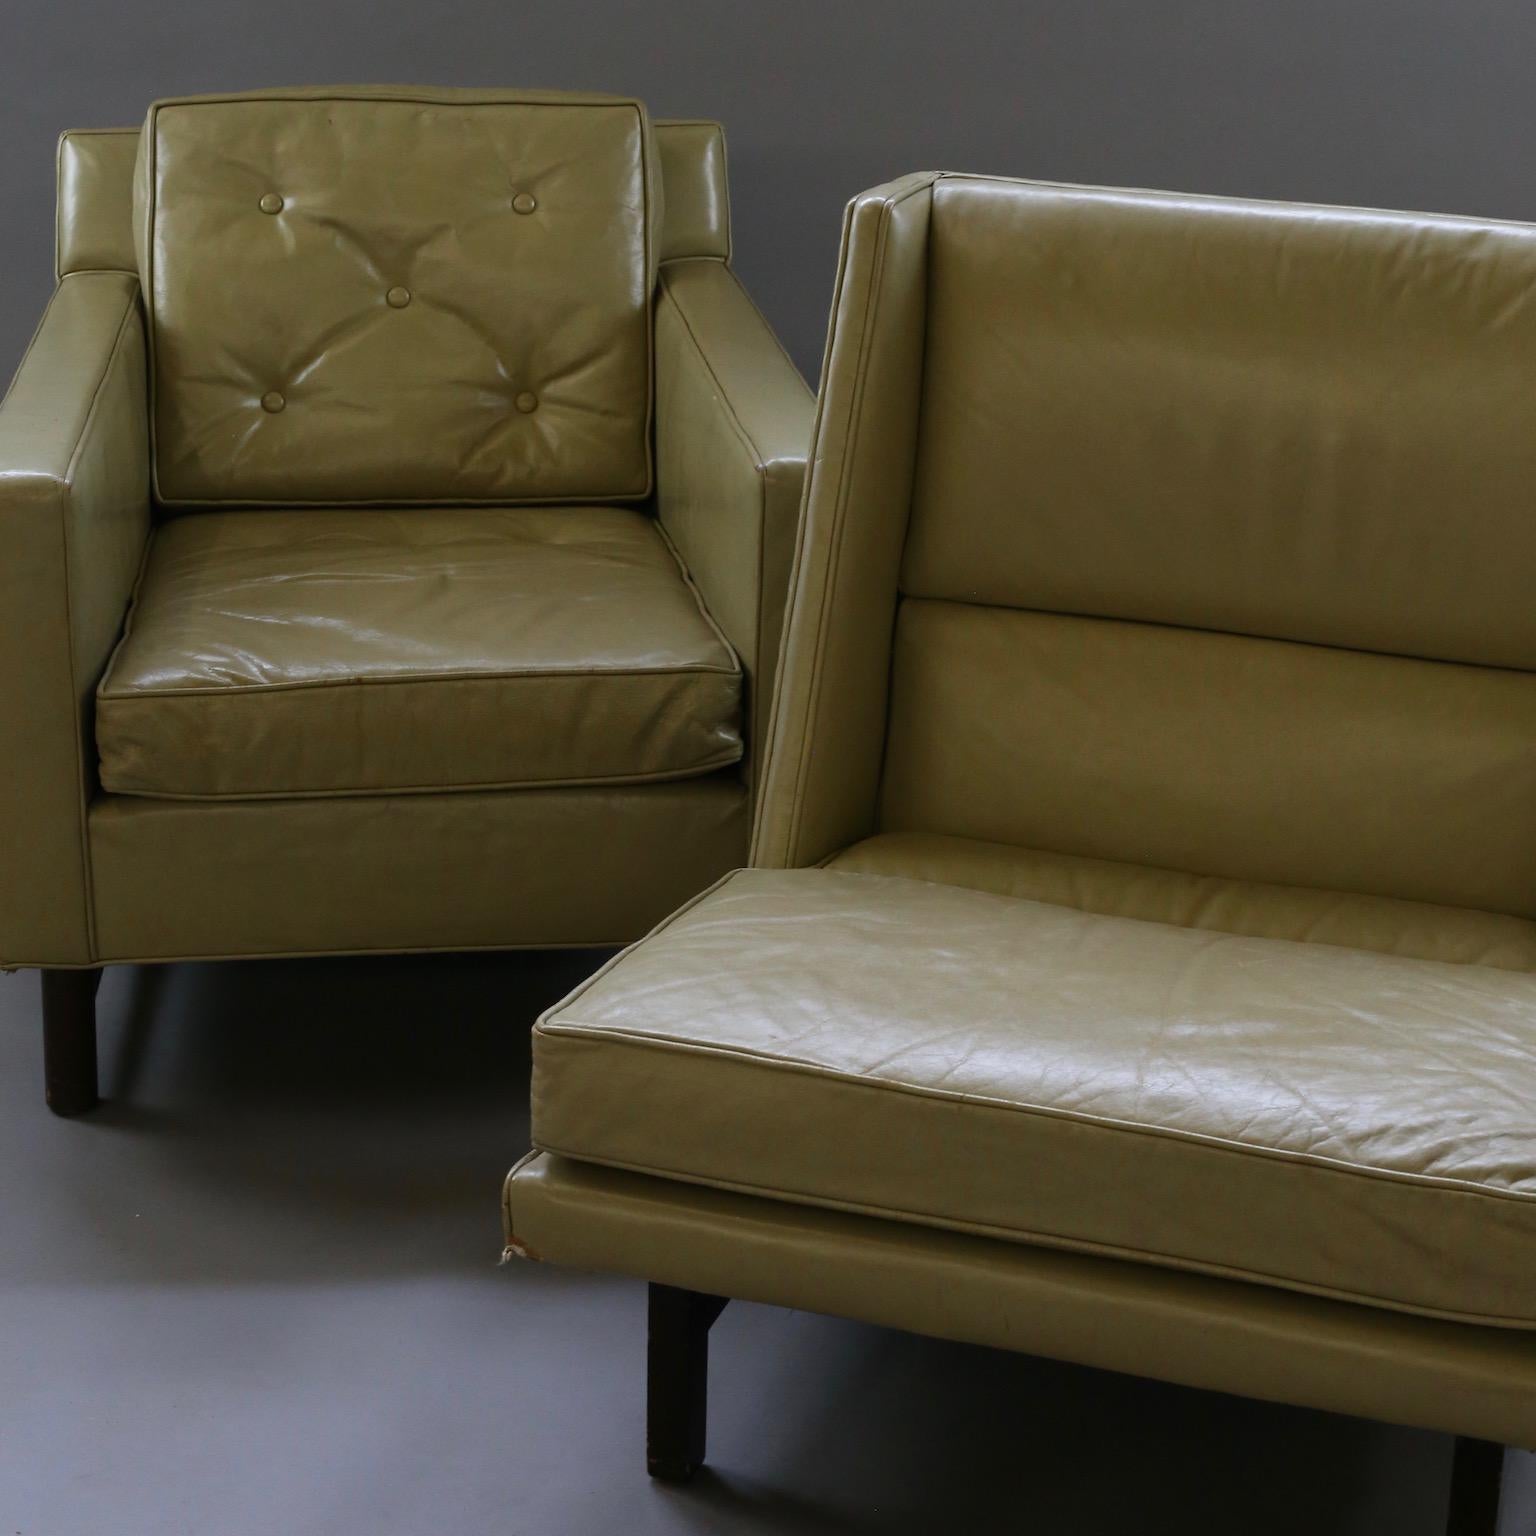 These chairs came from the headquarters of General Dynamics in Fort Worth. Special custom order for famed architectural firm Welton Beckett & Associates in California. Designed by Edward Wormley and upholstered in avocado leather by Dunbar in 1964.